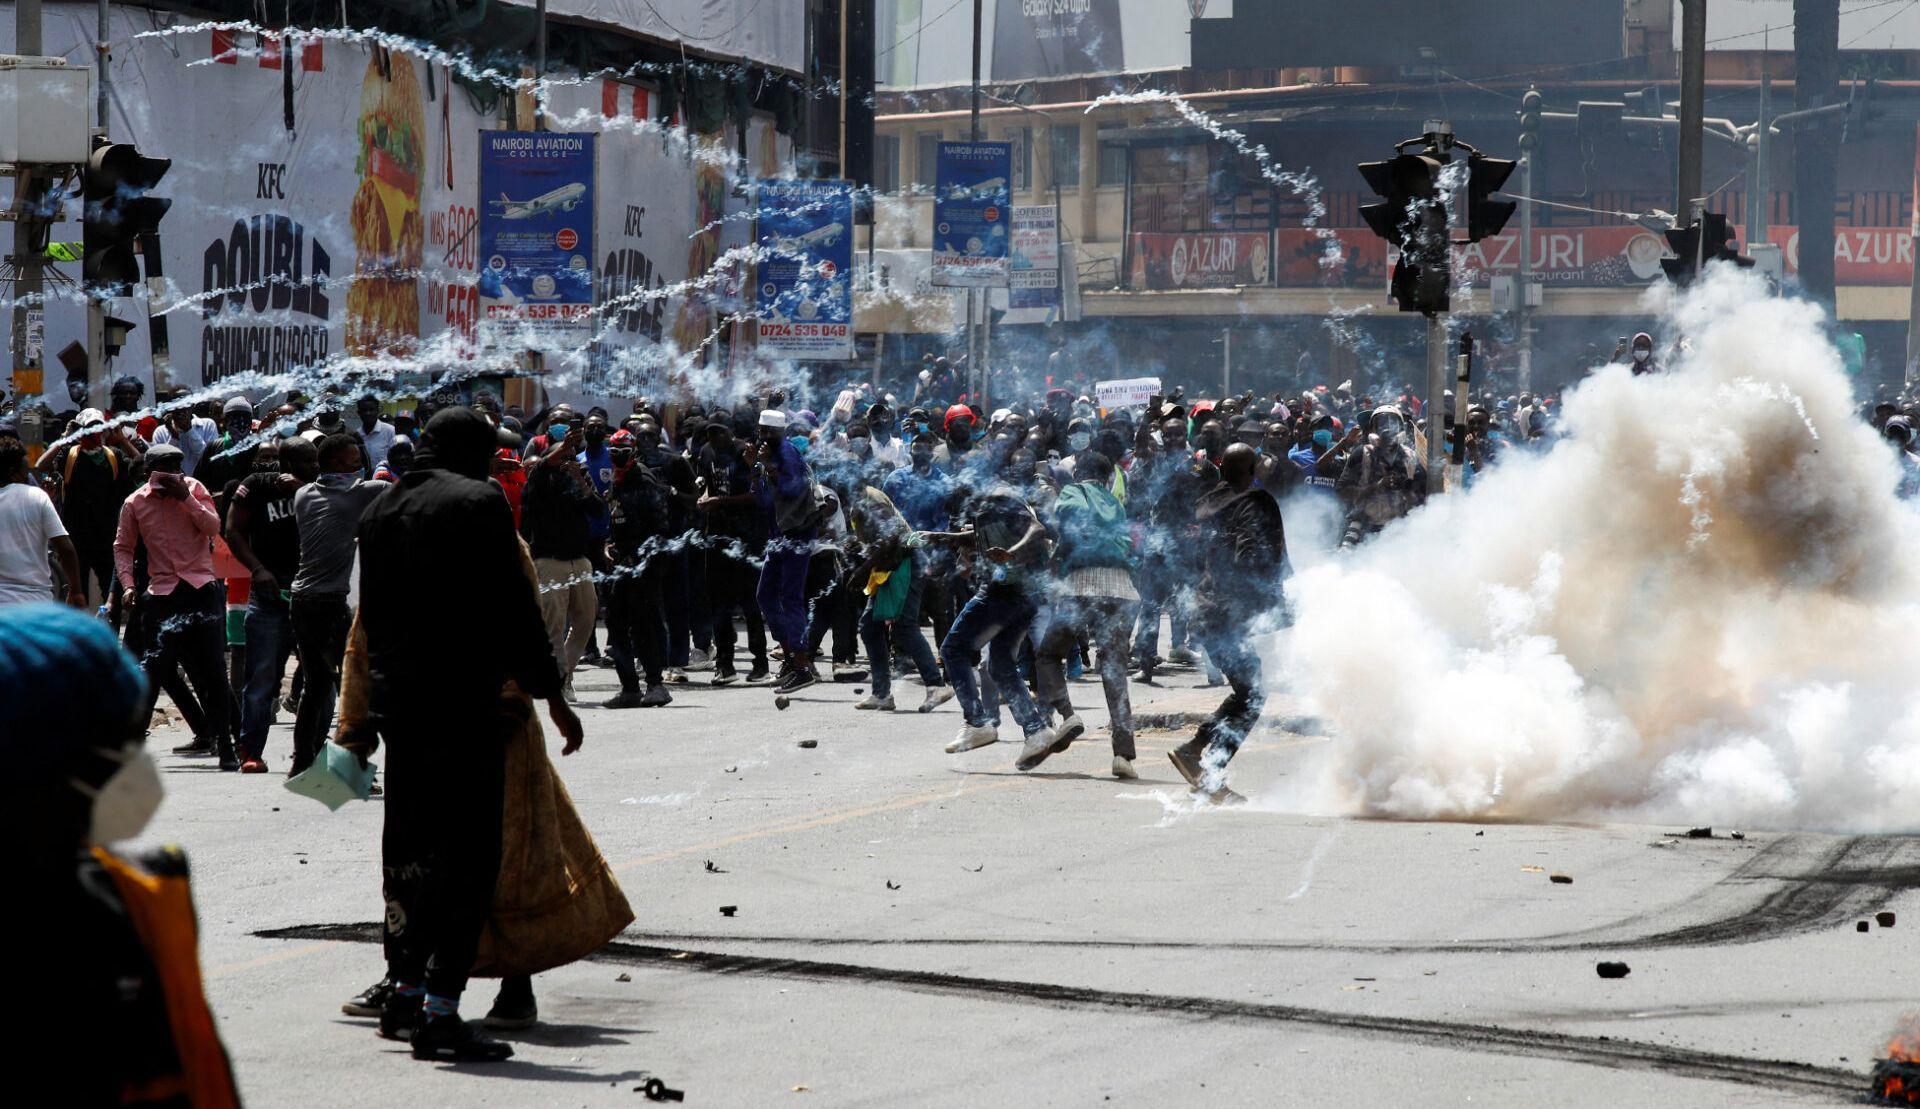 More protests expected in Kenya